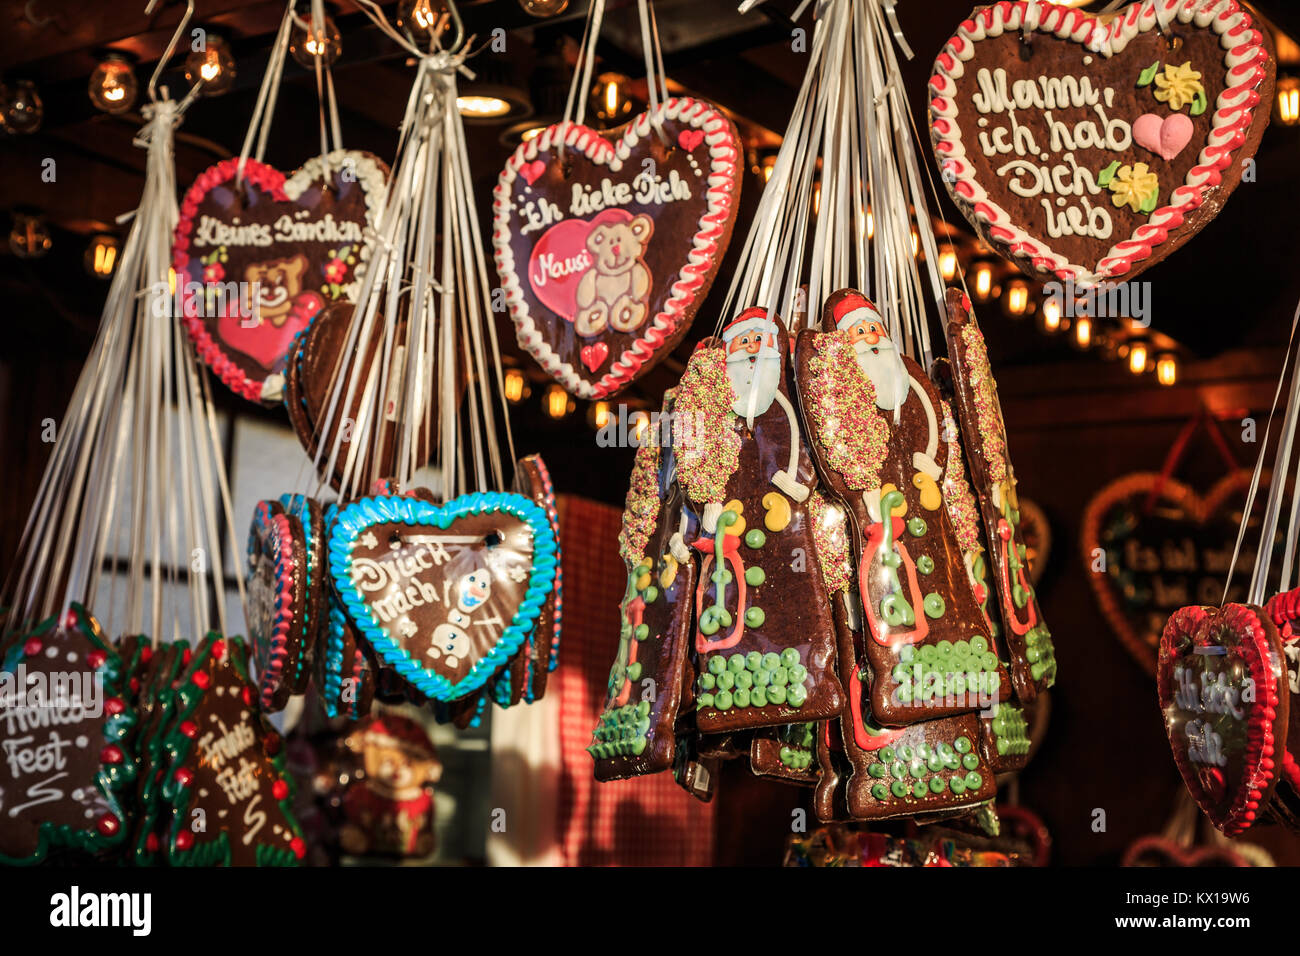 German Lebkuchen cookies for sale in a Christmas market stall Stock Photo